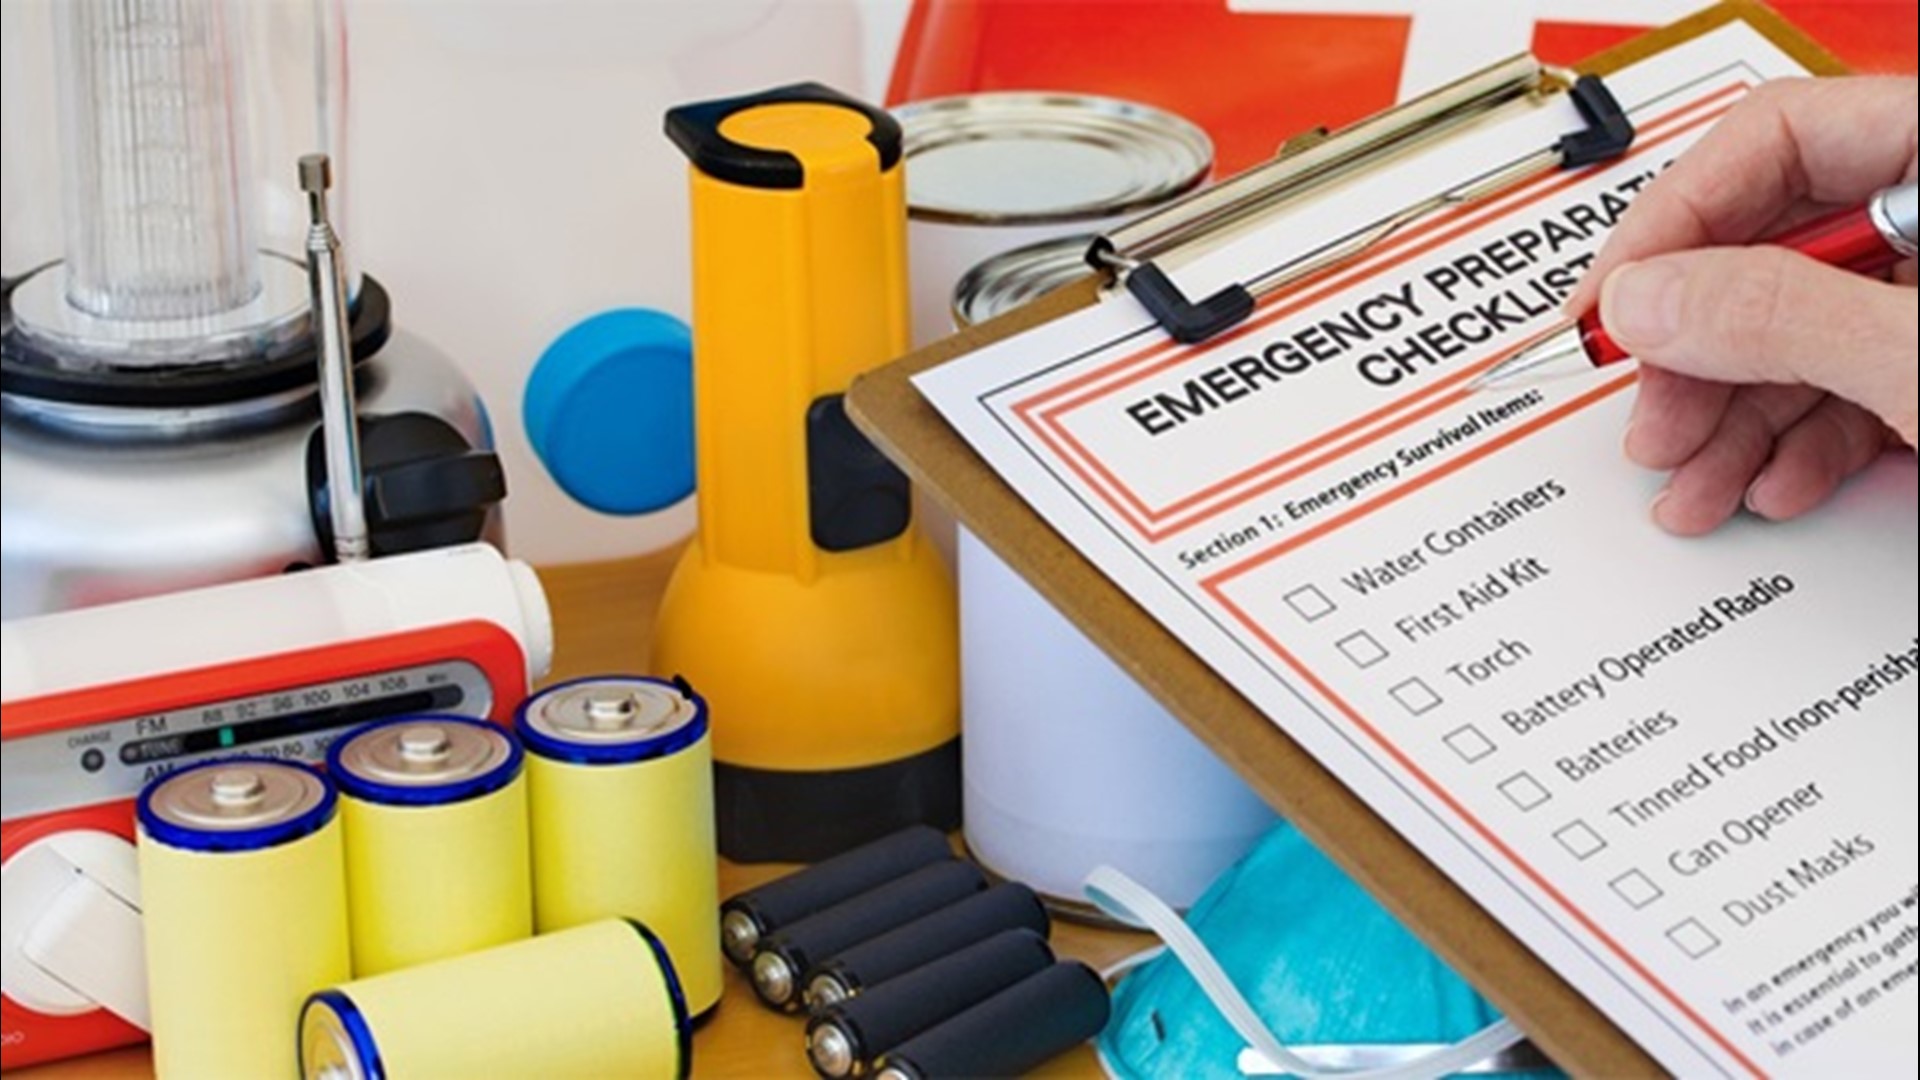 Don't be caught off guard when the season's first Hurricane Warning or Watch comes in! Here are tips for packing an emergency kit.